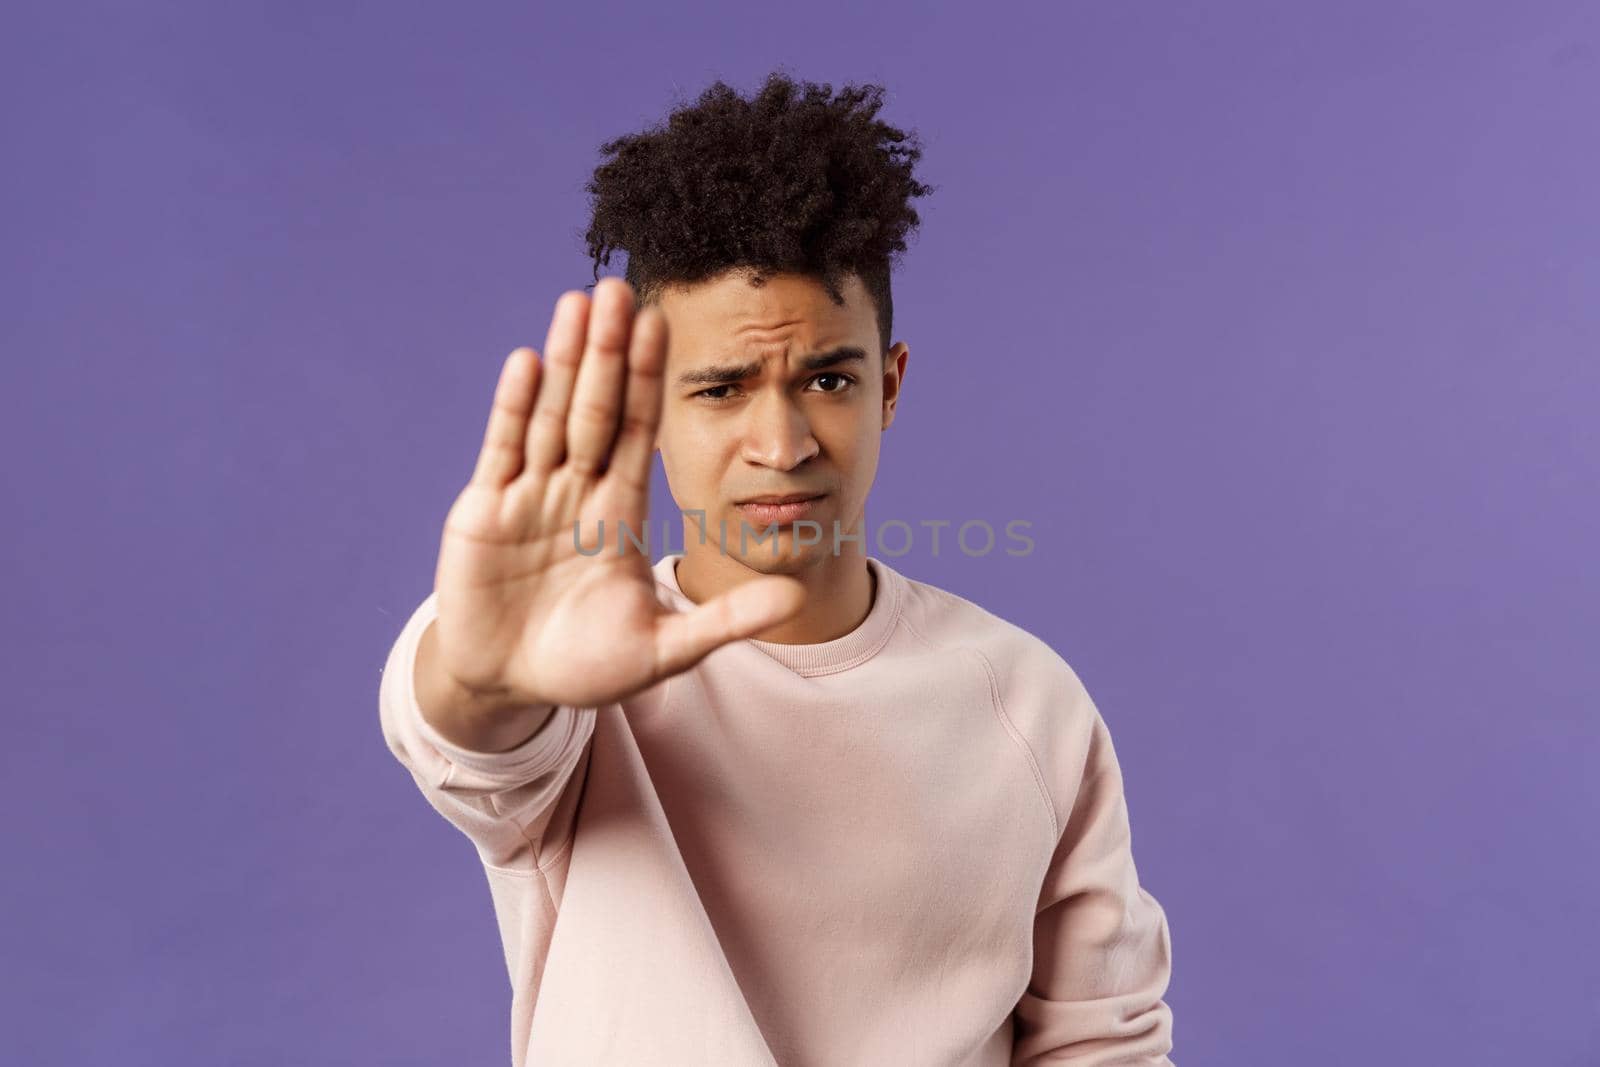 Man you should stop. Close-up portrait of young serious-looking male friend trying to warn person of doing something bad, raise hand to prohibit, forbid no trespassing, purple background by Benzoix